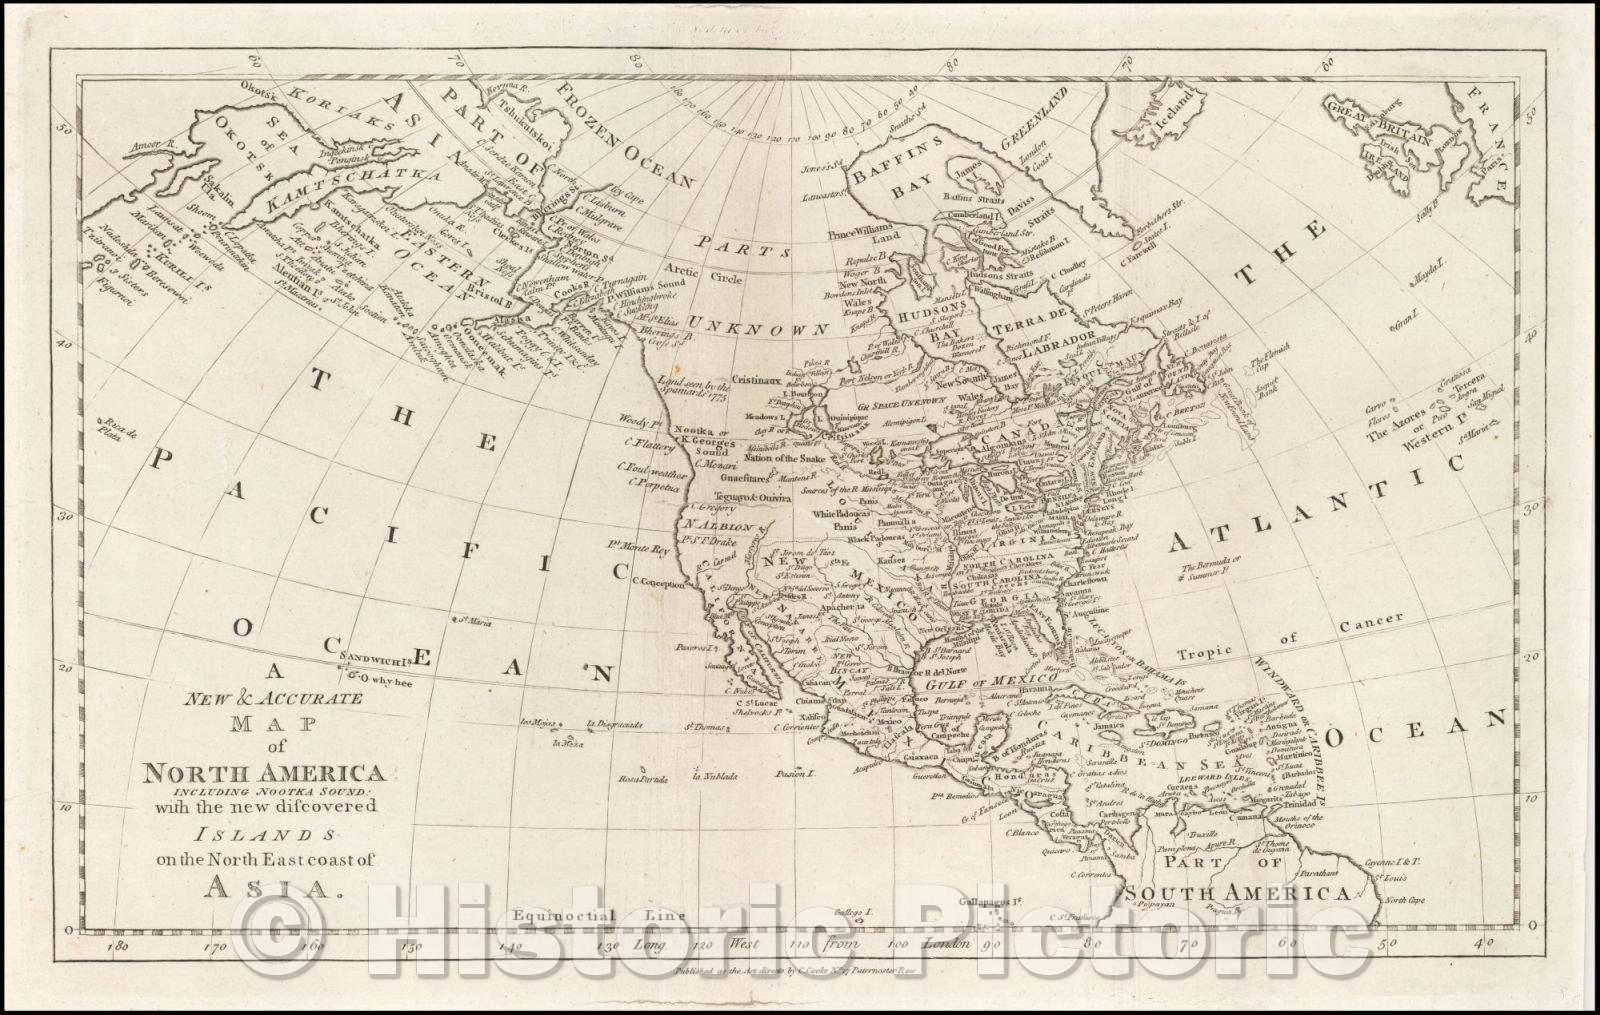 Historic Map - New & Accurate Map of North America Including Nootka Sound: with new discovered Islands on the East Coast of Asia, 1785, C. Cooke - Vintage Wall Art